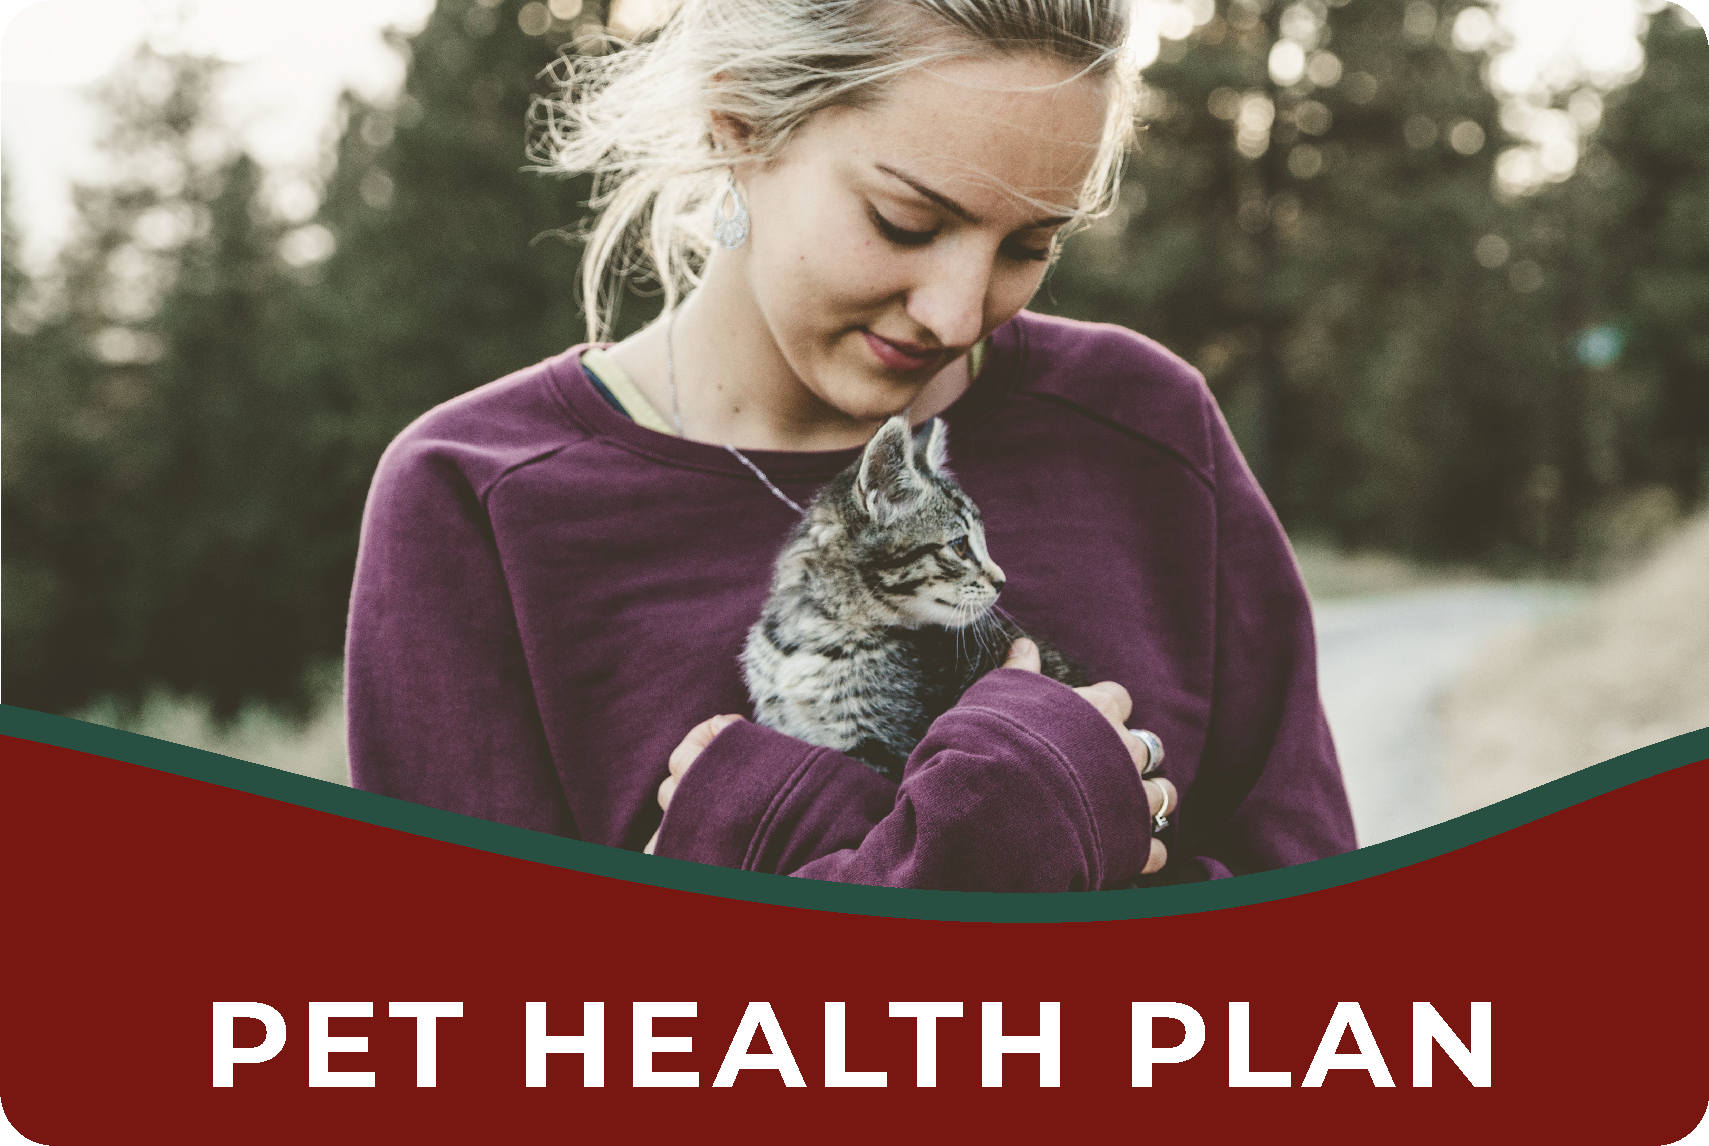 Find out more about our Healthy Pet Care